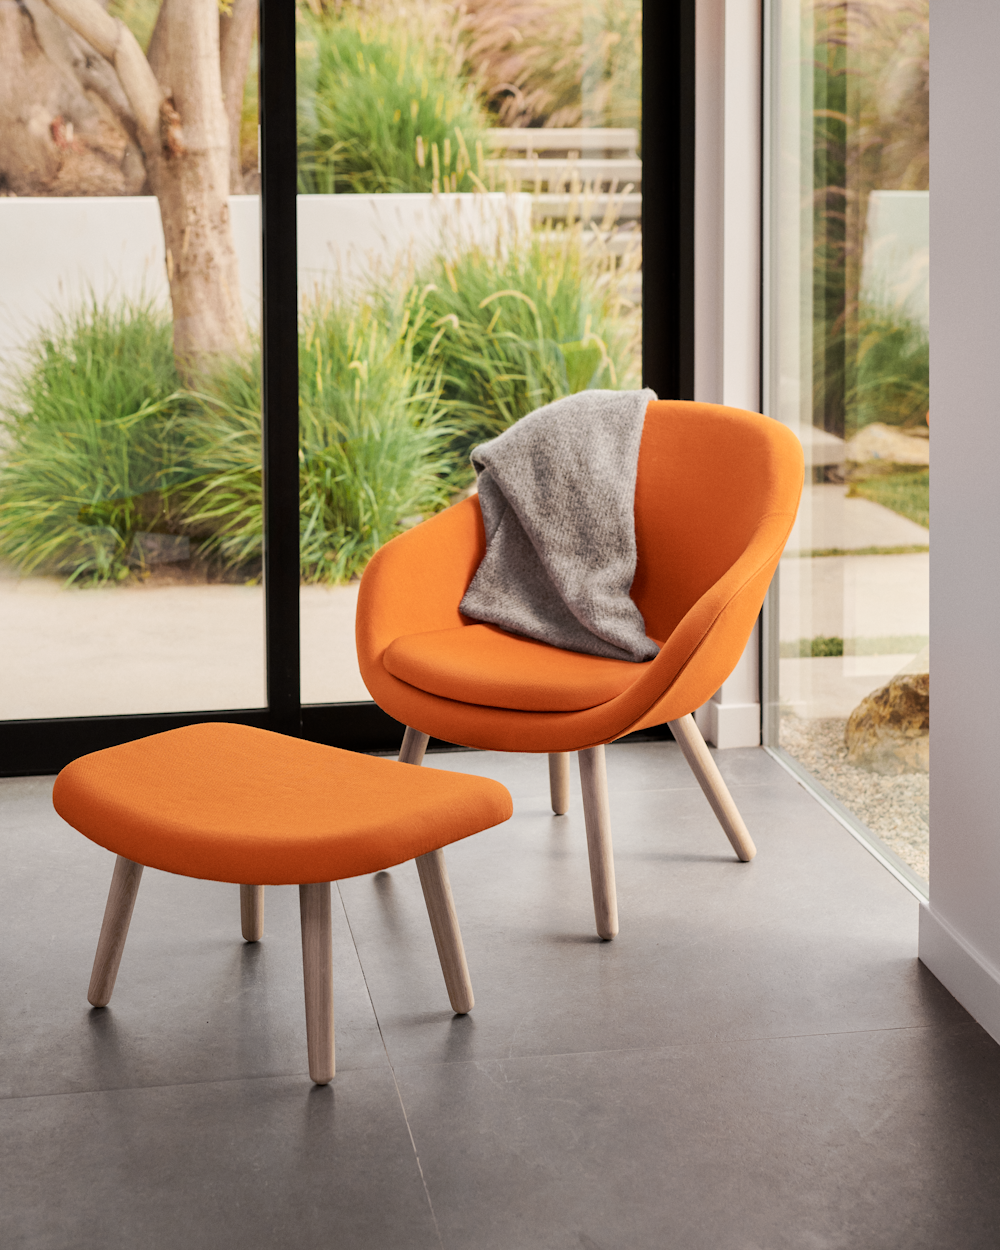 About A Lounge 82 Armchair in a sunroom setting